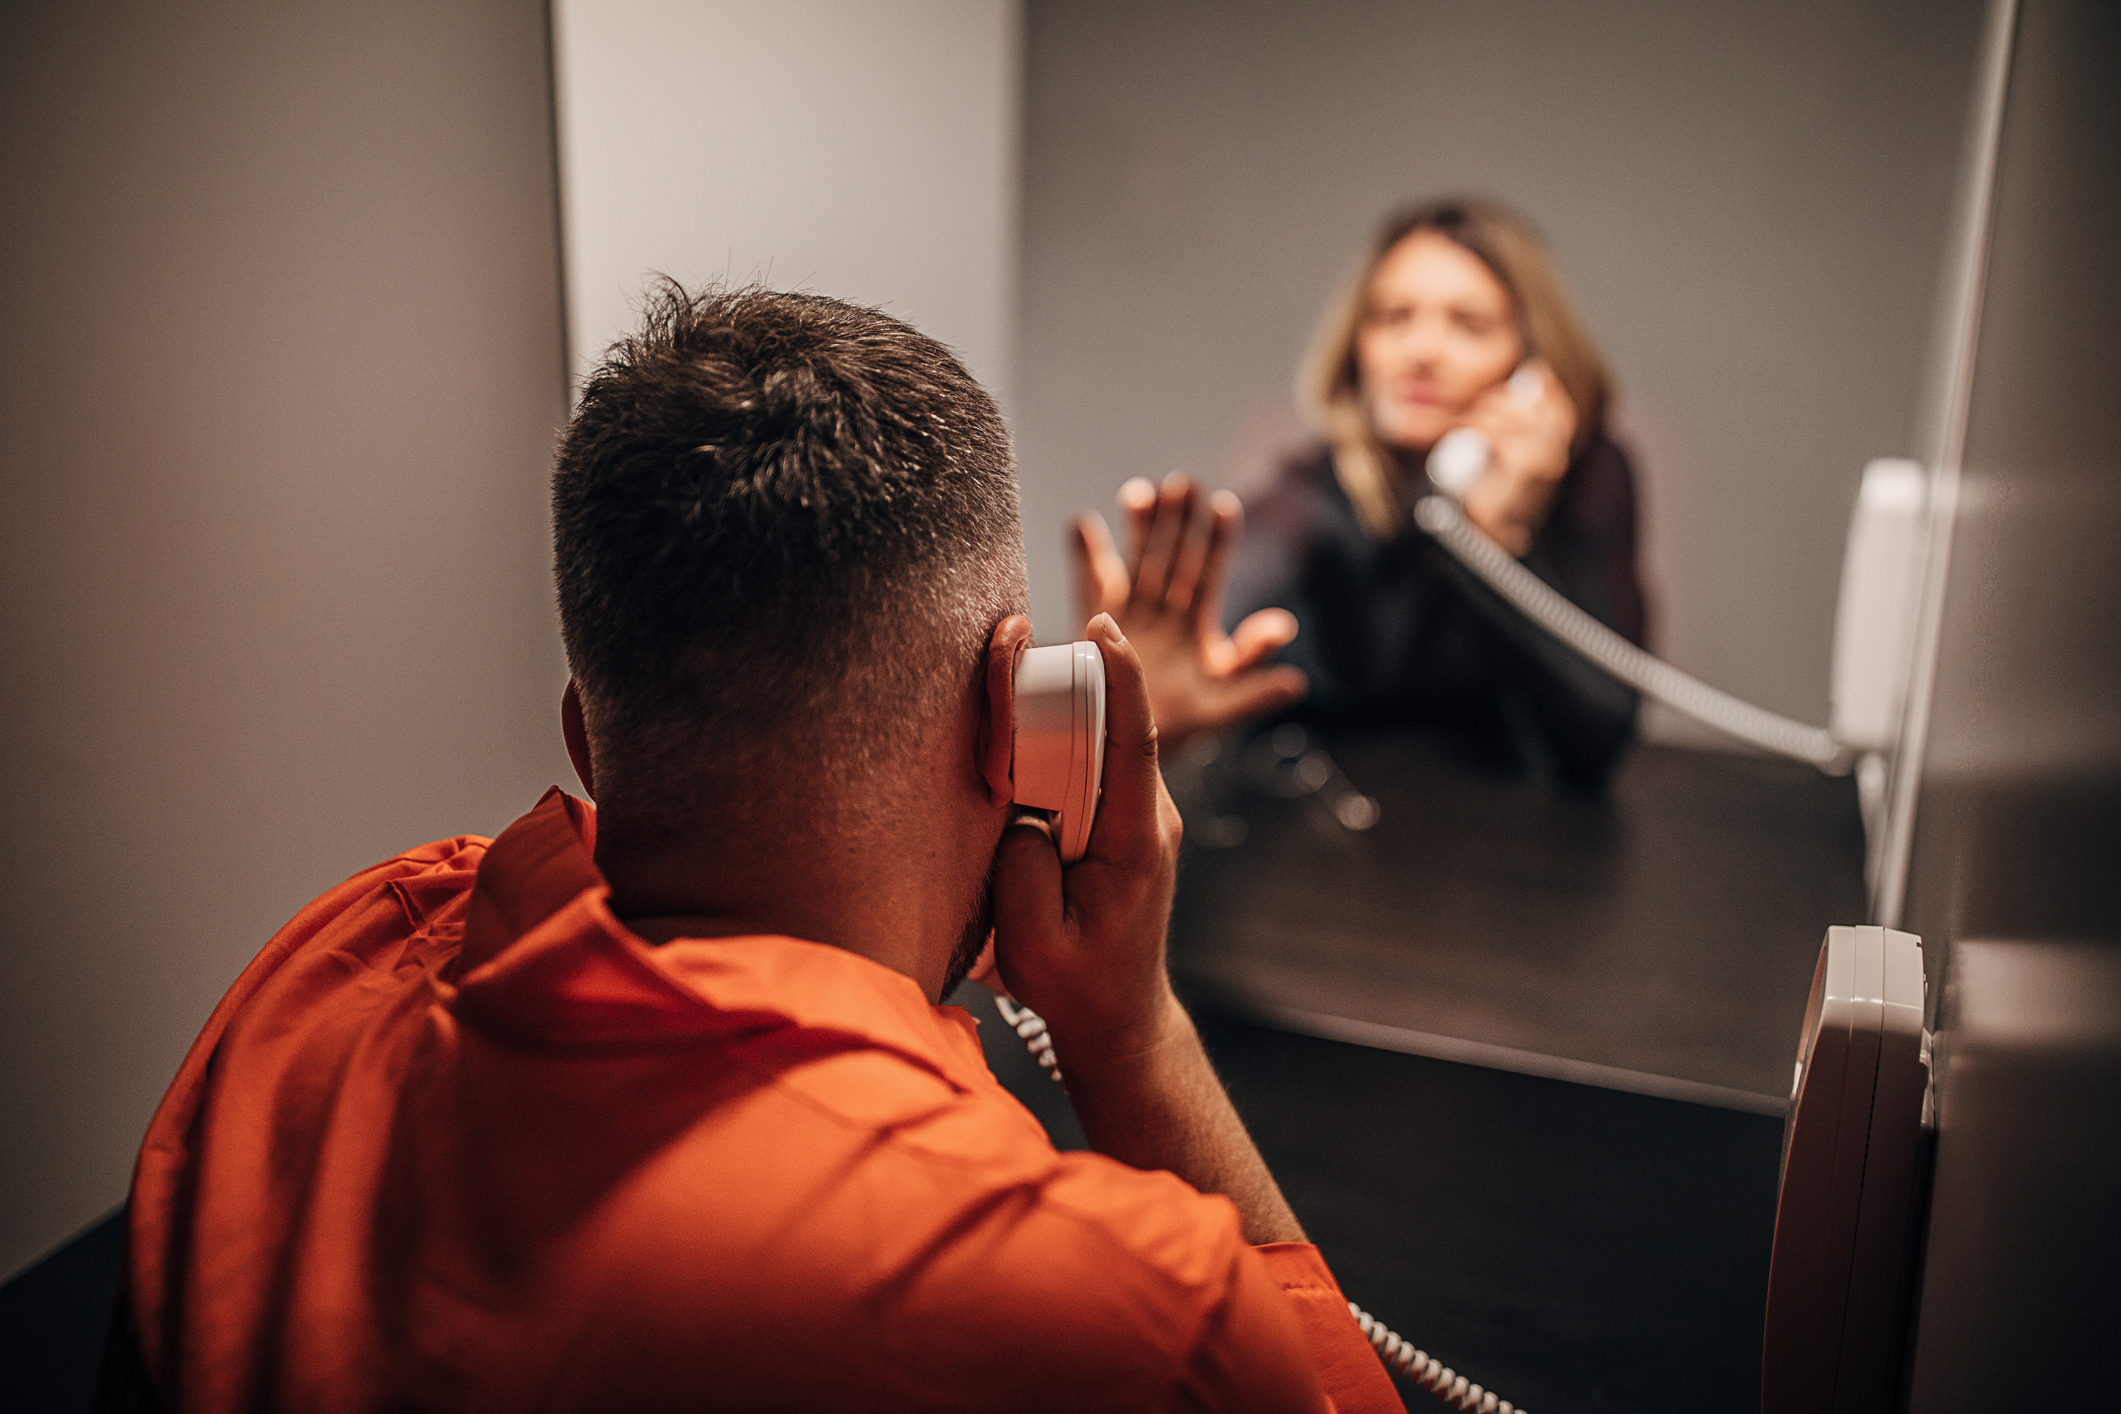 Prisoner speaks over phone behind a reflective glass with another individual on the other